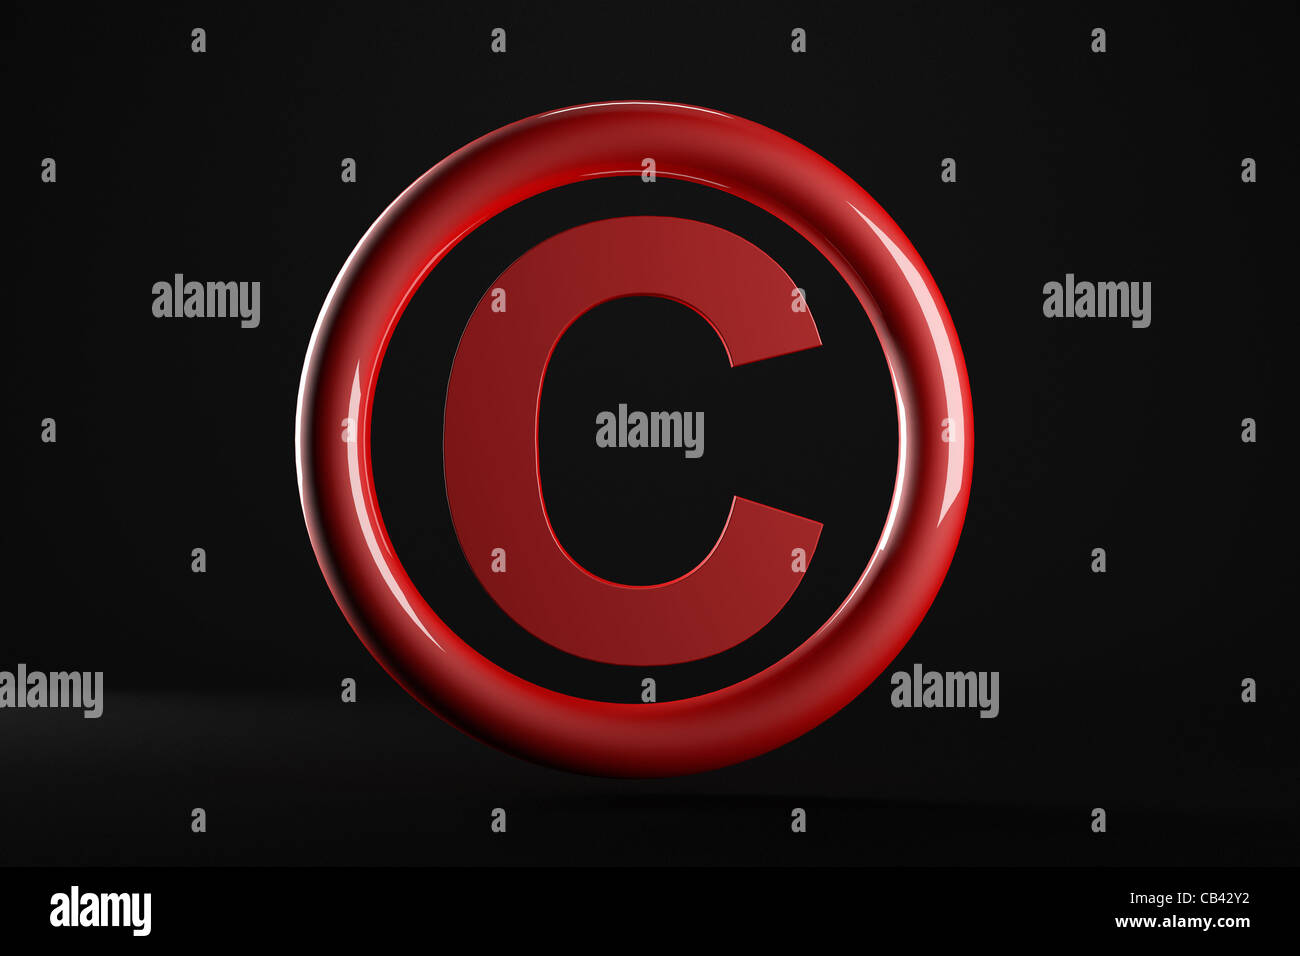 Red copyright symbol 3d rendered in a dark background Stock Photo